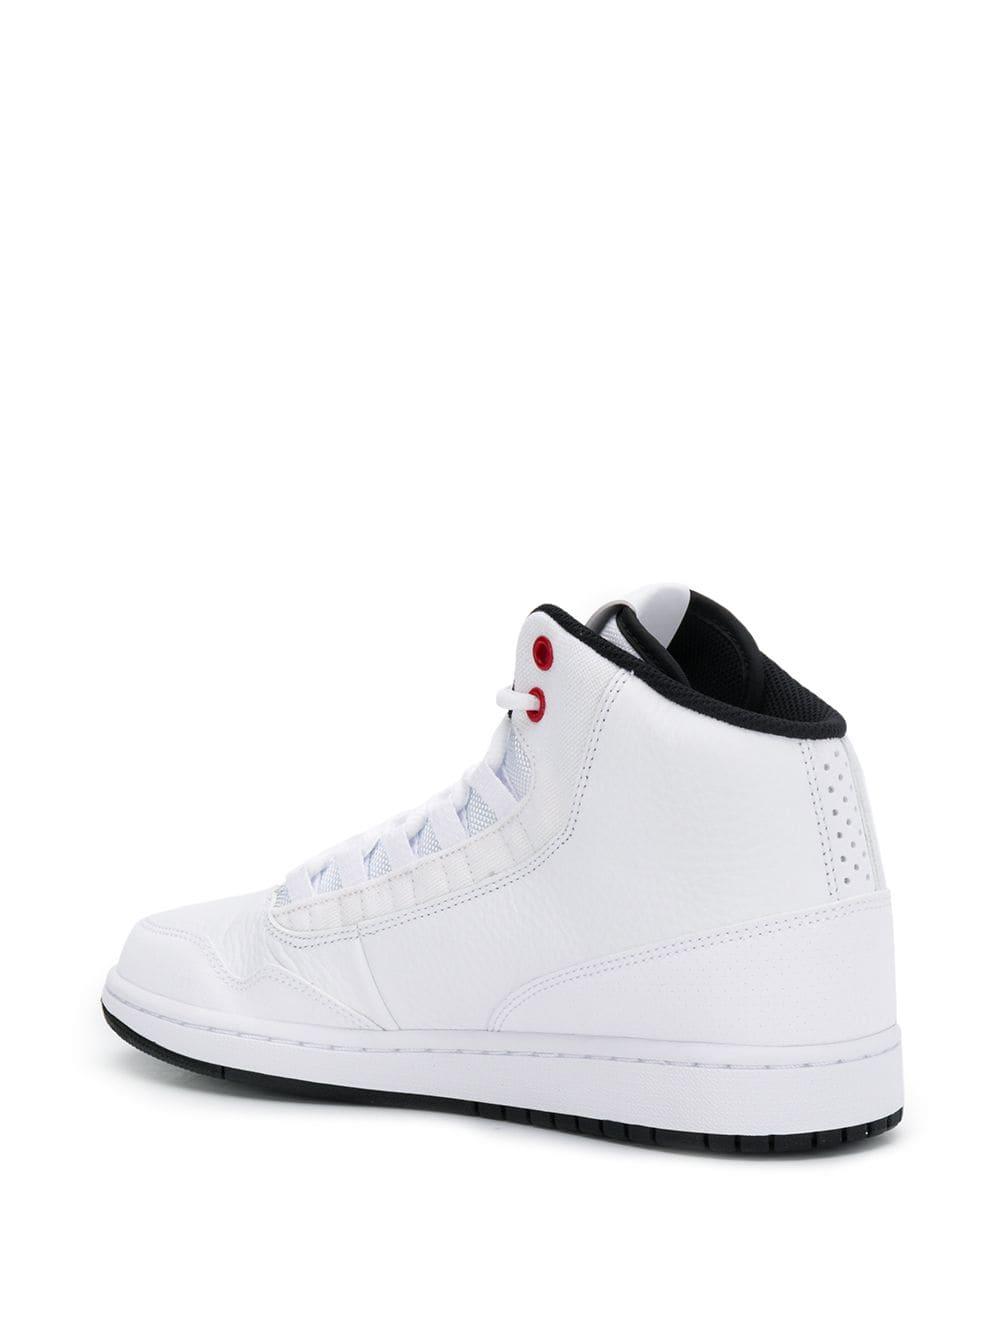 Nike Leather Jordan Executive Sneakers in White for Men - Lyst